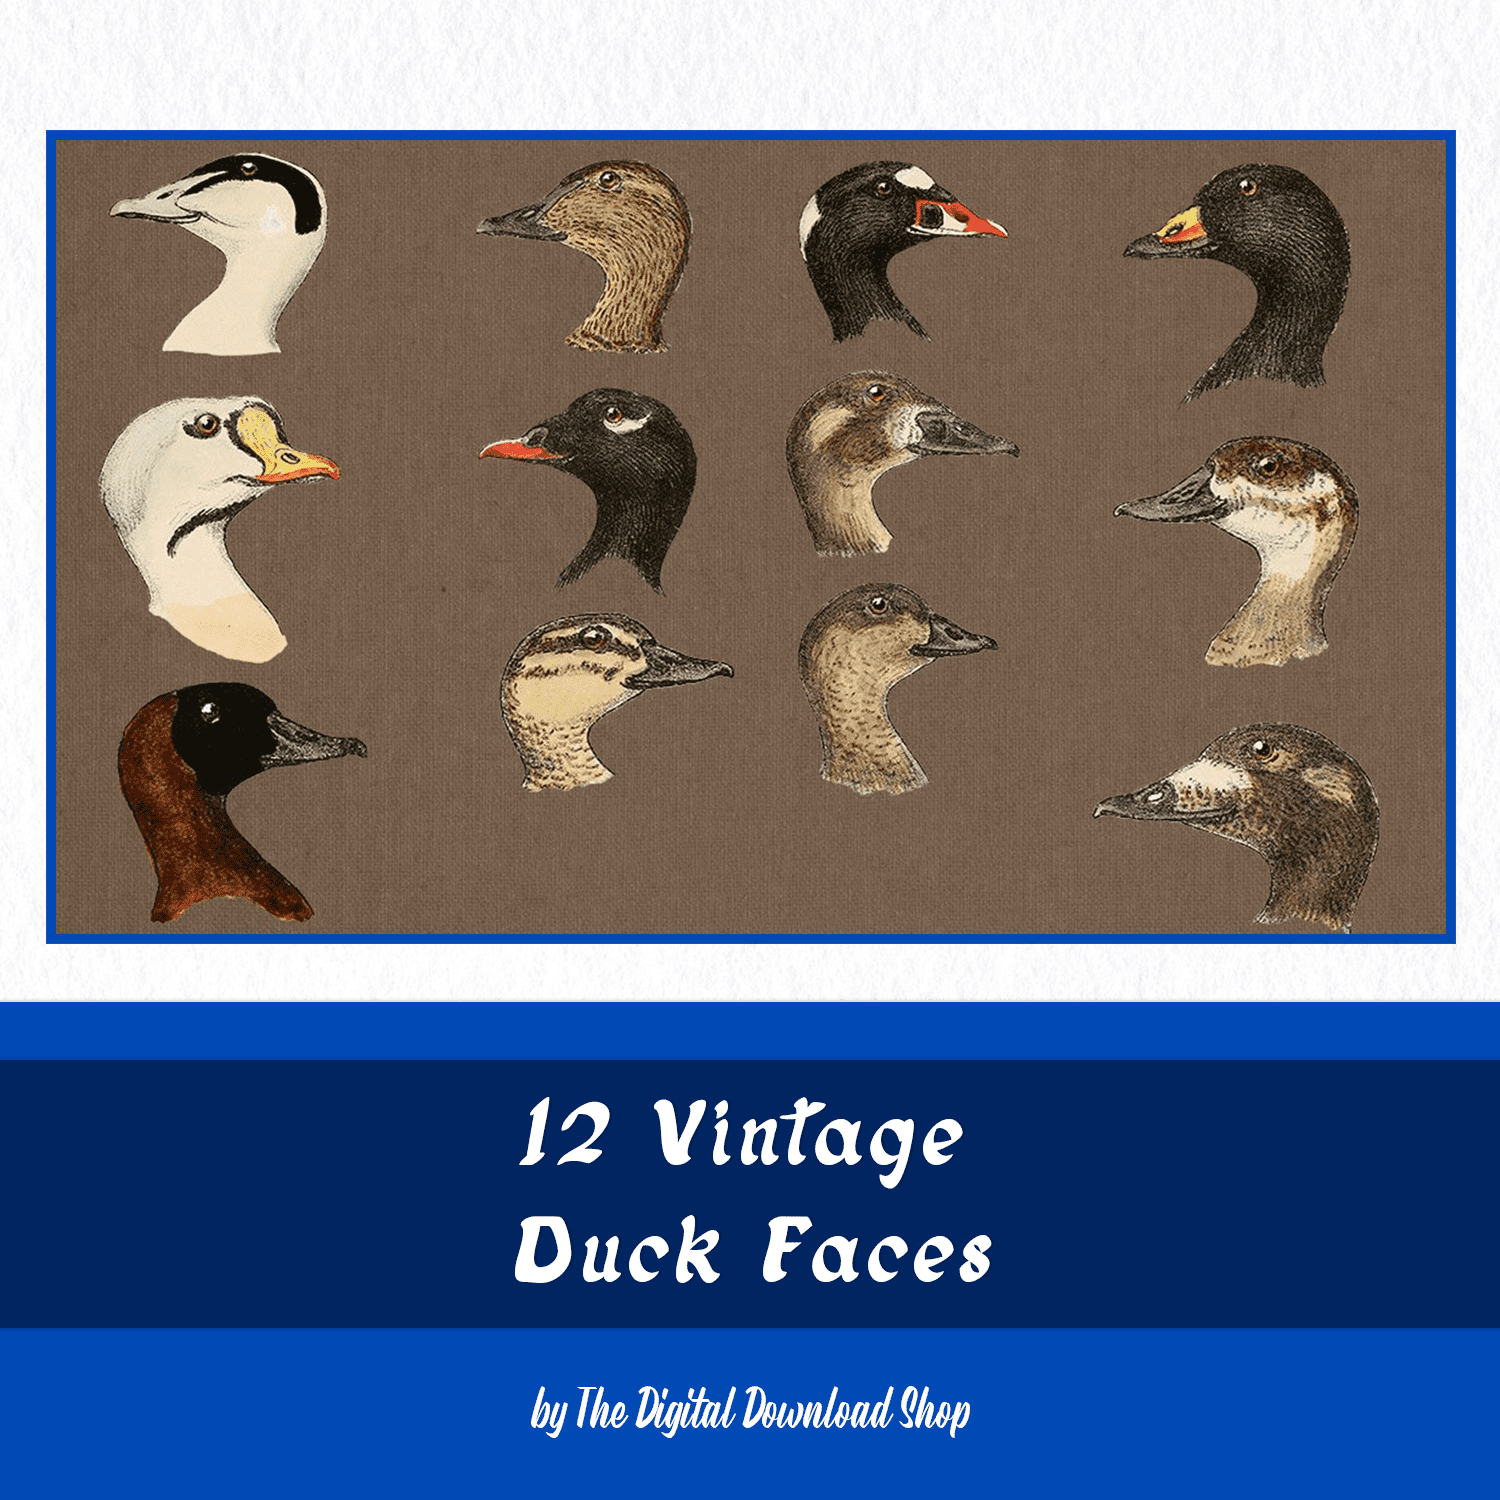 12 Vintage Duck Faces cover image.